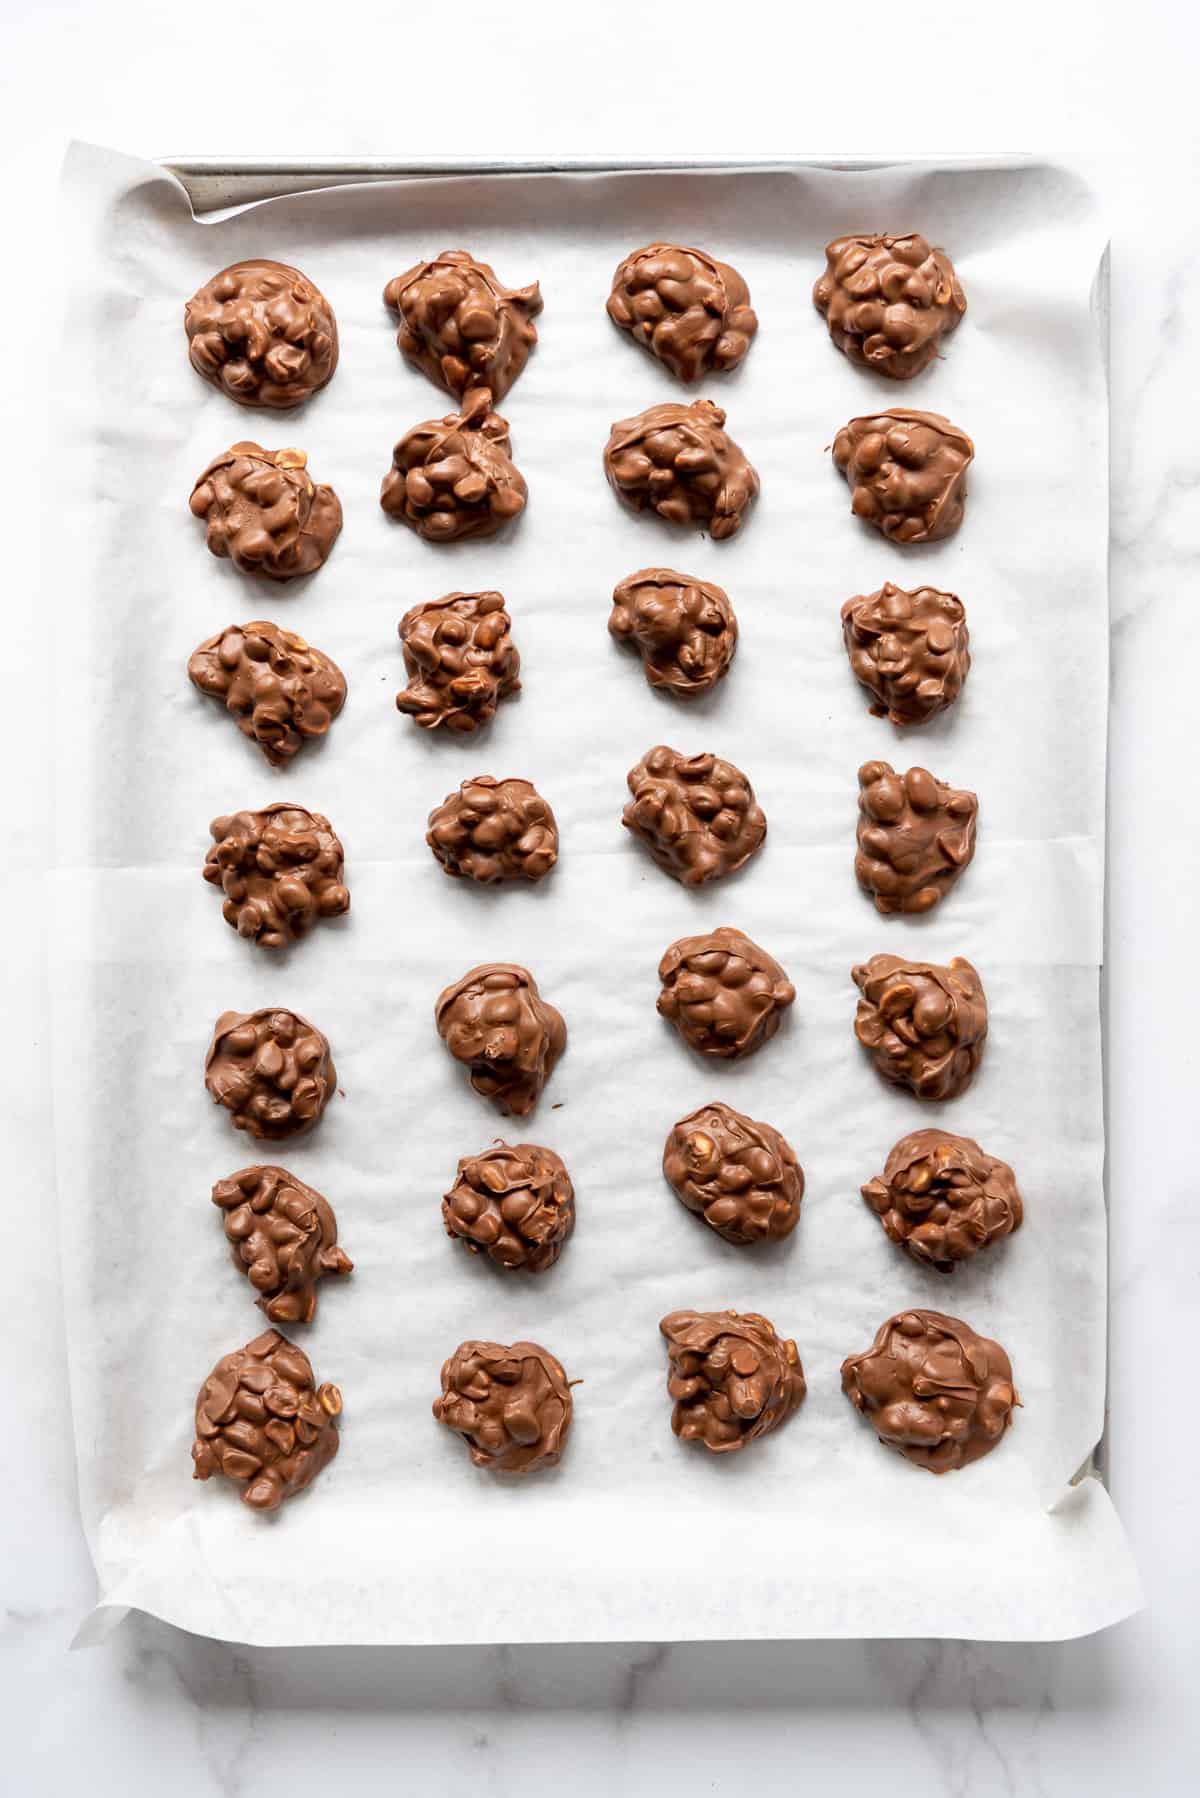 A large baking sheet lined with parchment paper filled with peanut clusters candy made in the crockpot.